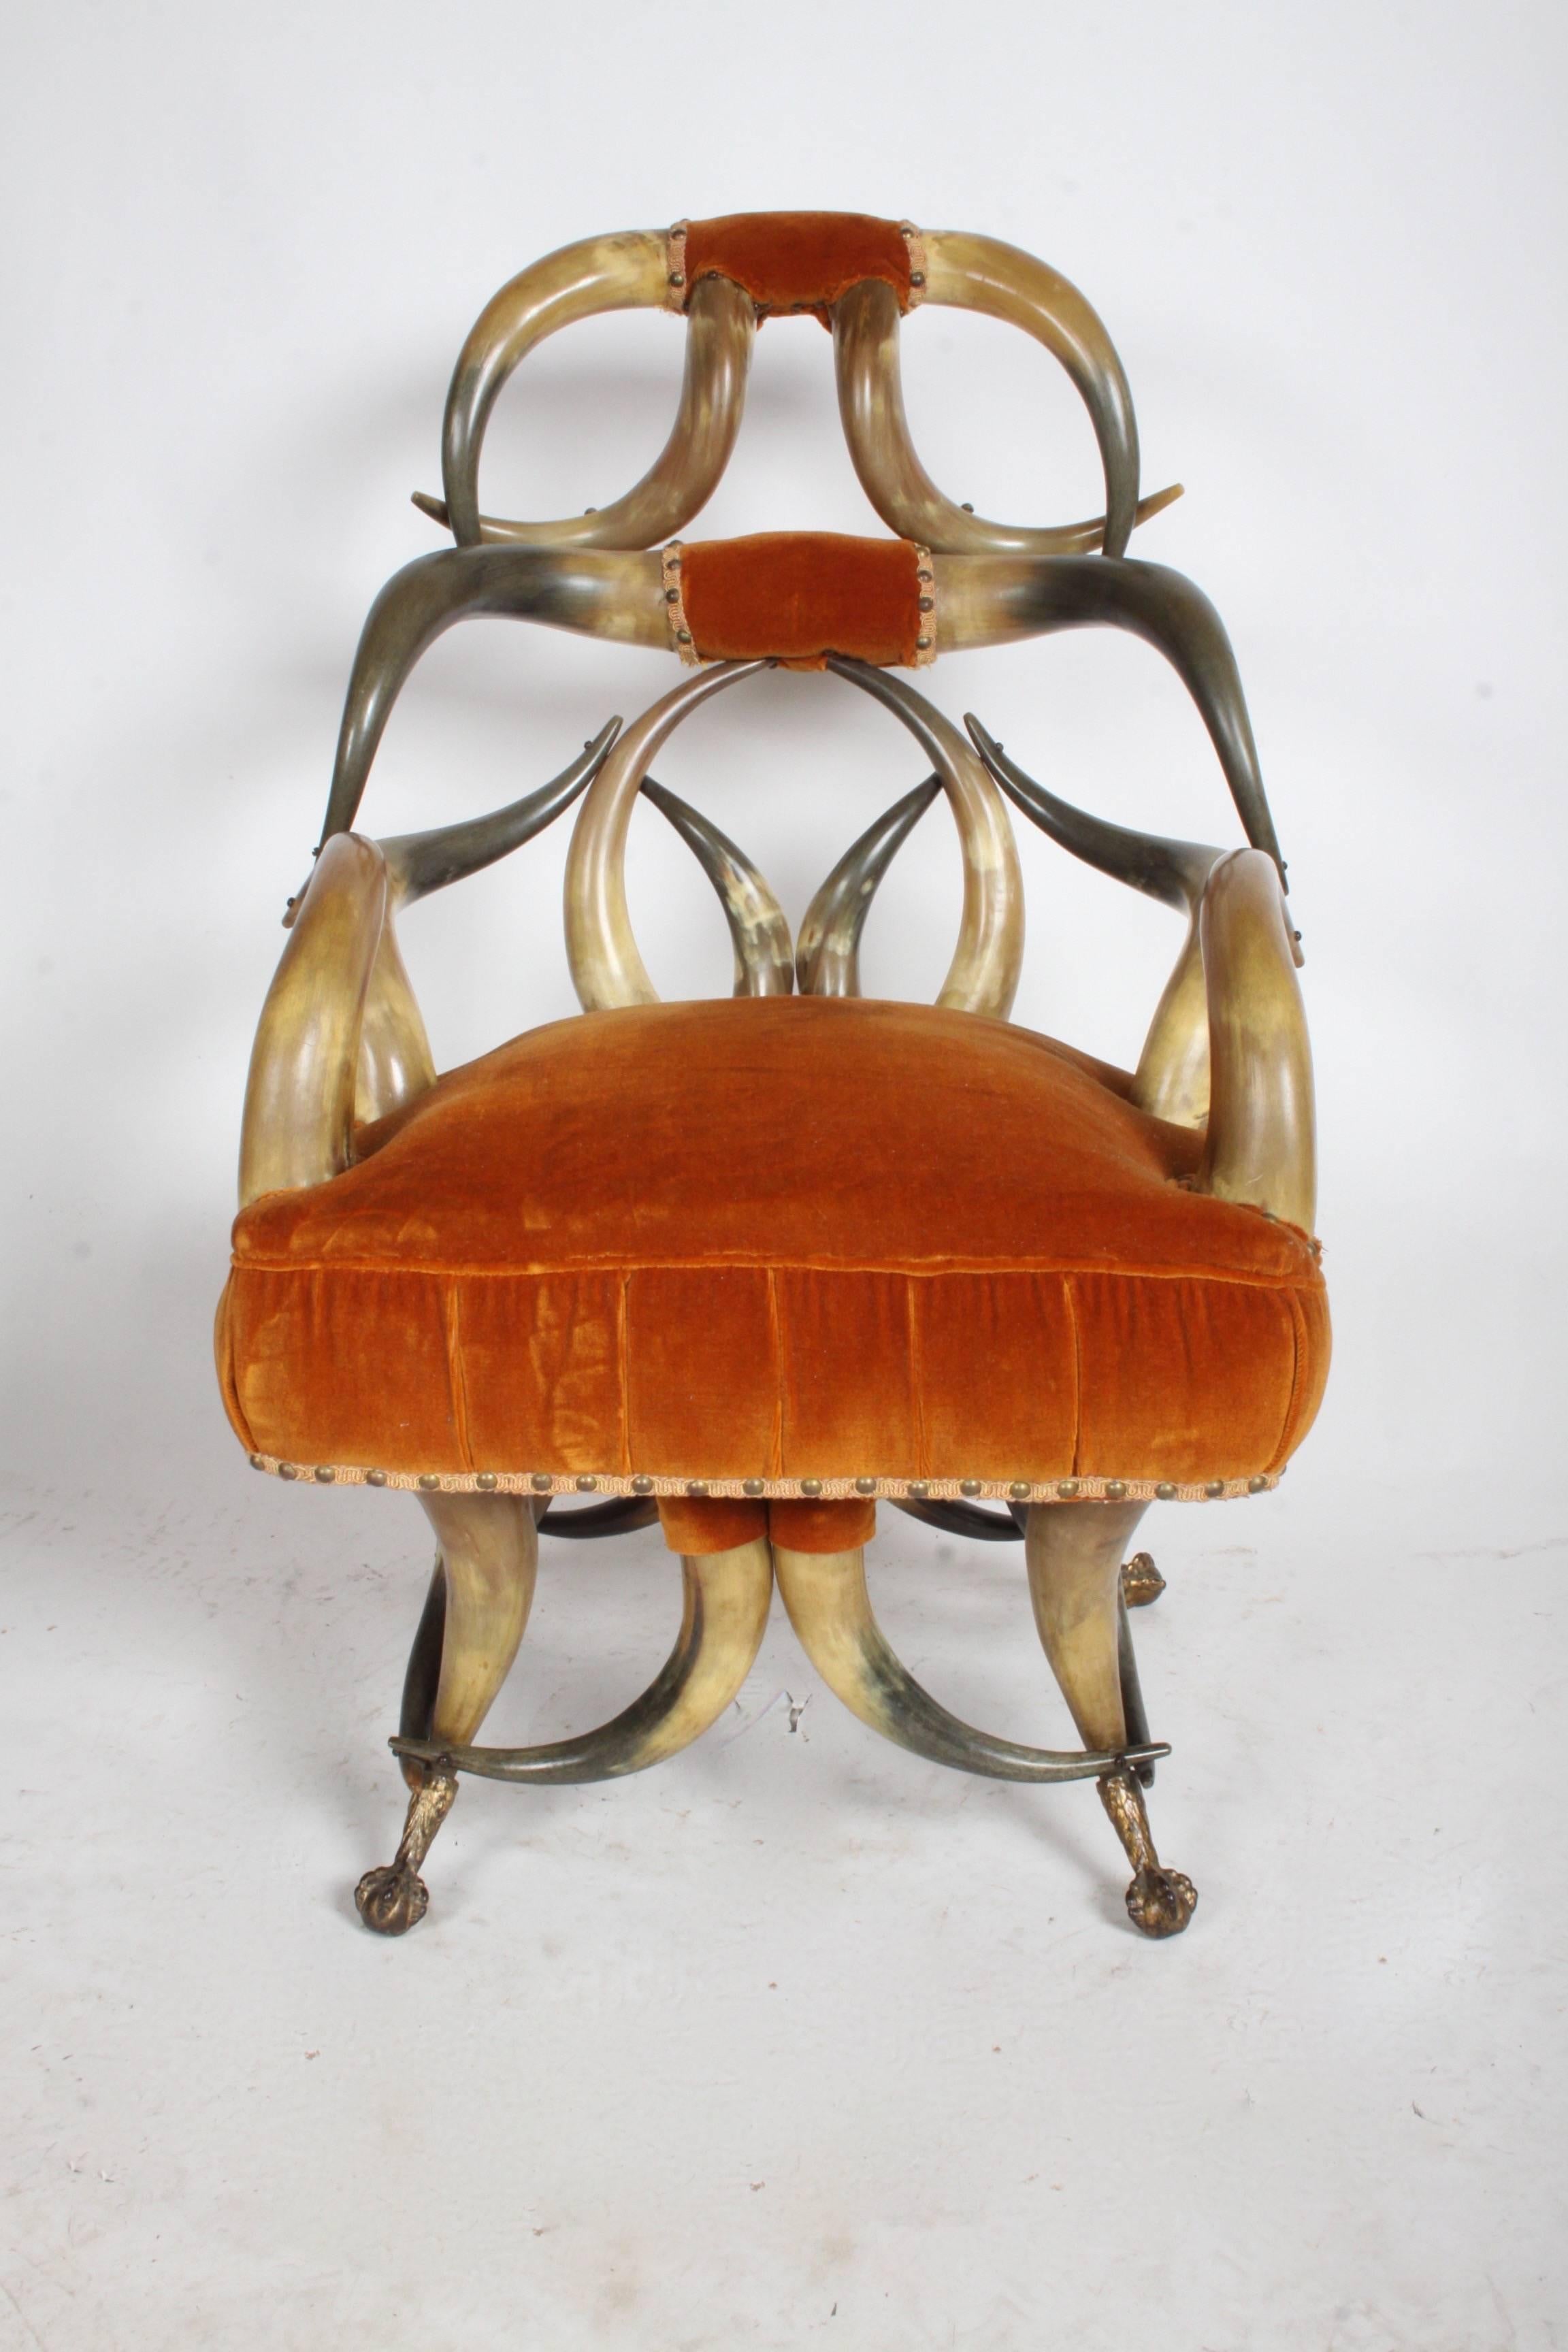 Incredible late 19th or early 20th century rustic steer long horn chair and ottoman. This chair is in great condition, has spring seat and is very sturdy. Older burnt orange velvet upholstery. Chair rest on gilded claw and ball feet. Ottoman has